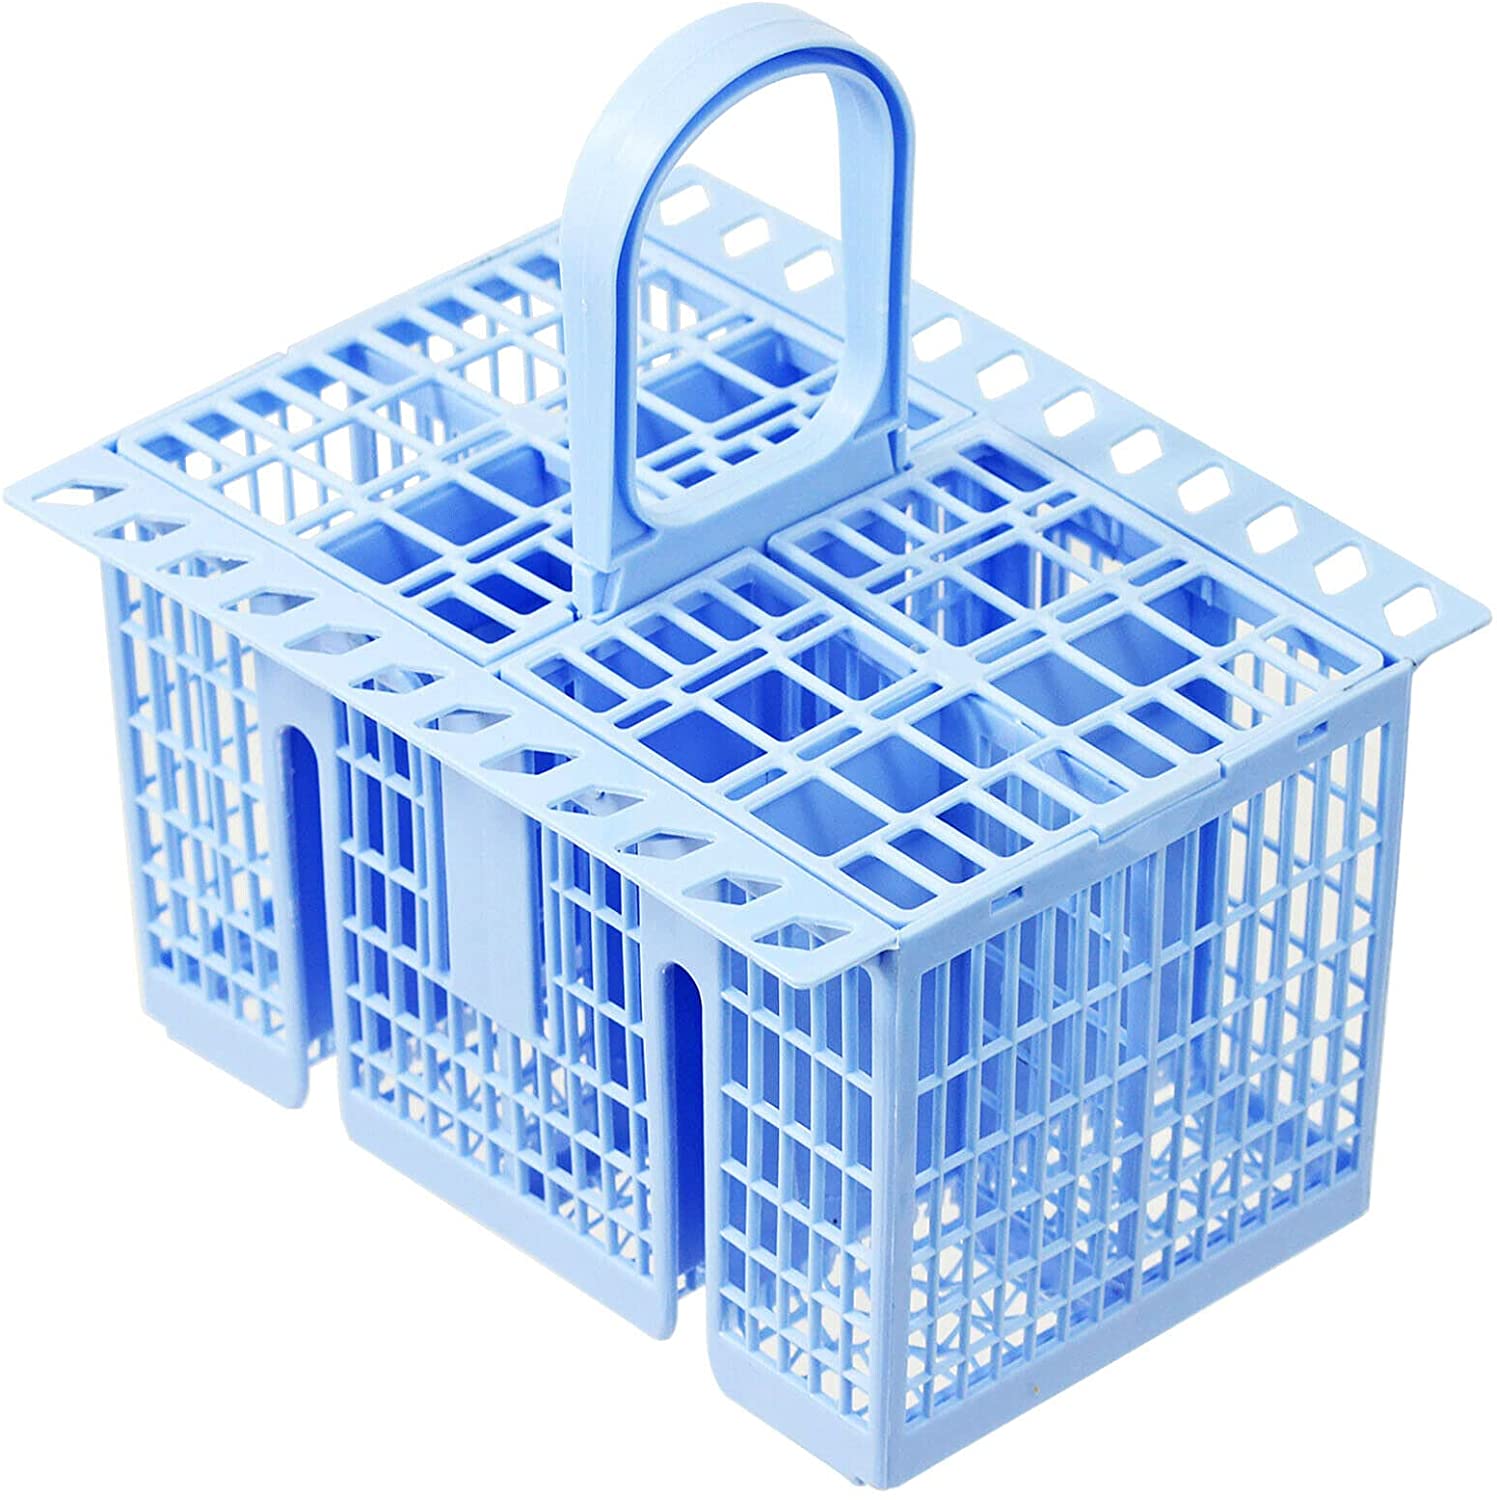 SPARES2GO Cutlery Basket compatible with COMFEE' Dishwasher (Blue, 220 x 208 x 160mm)